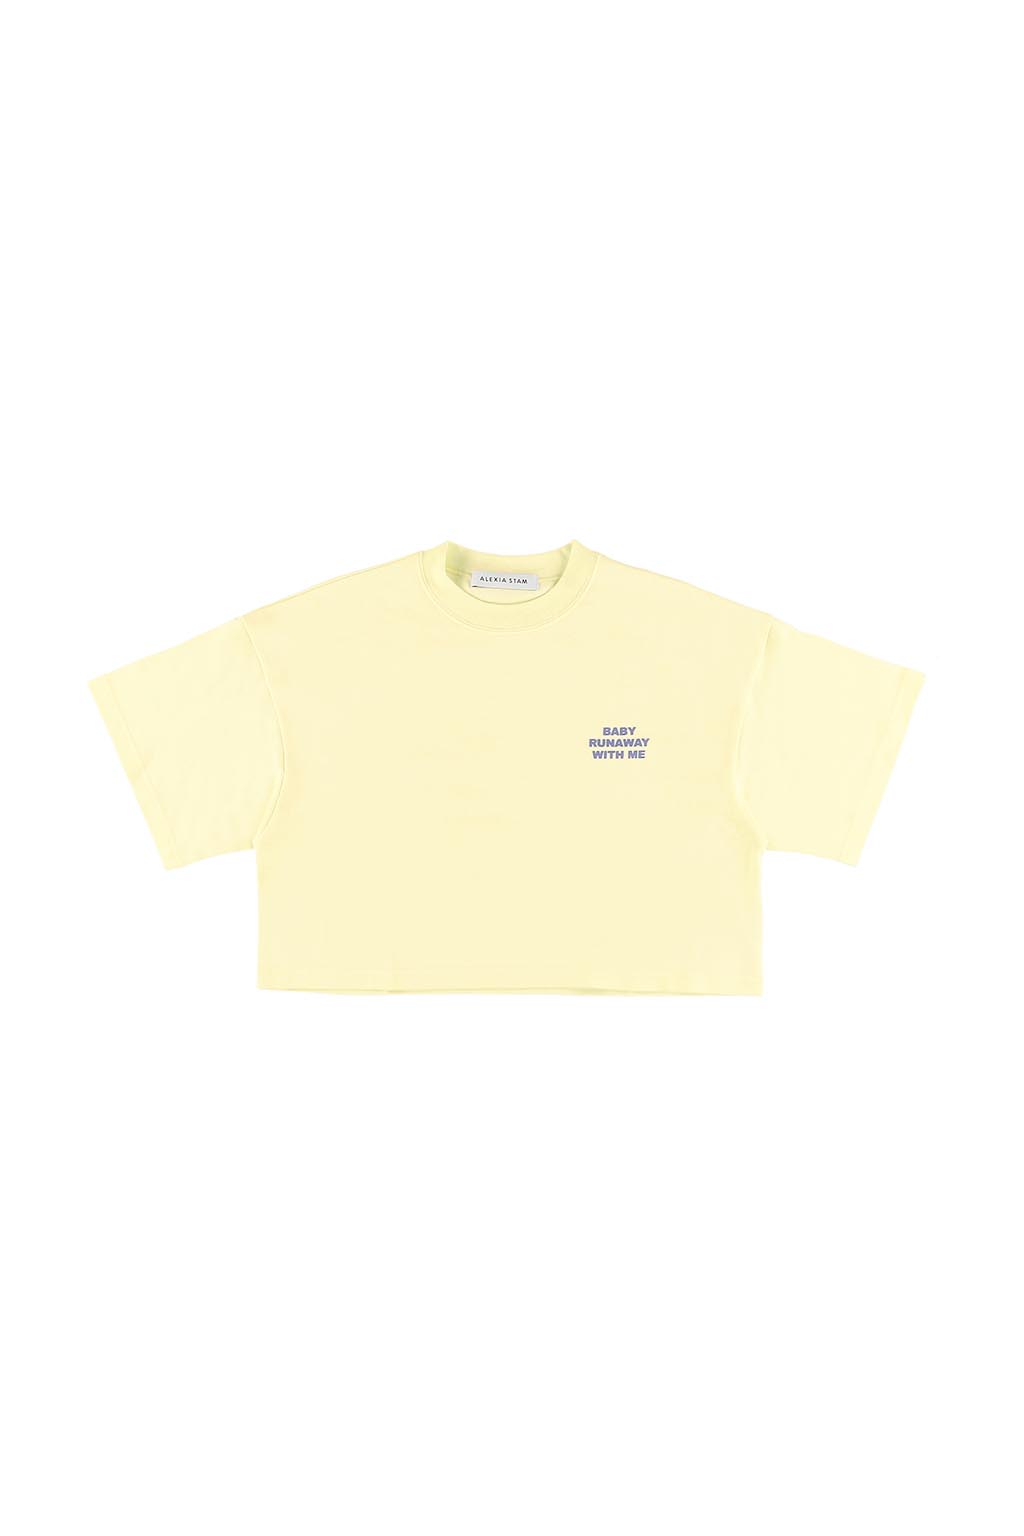 Front Message Tee Yellow 2